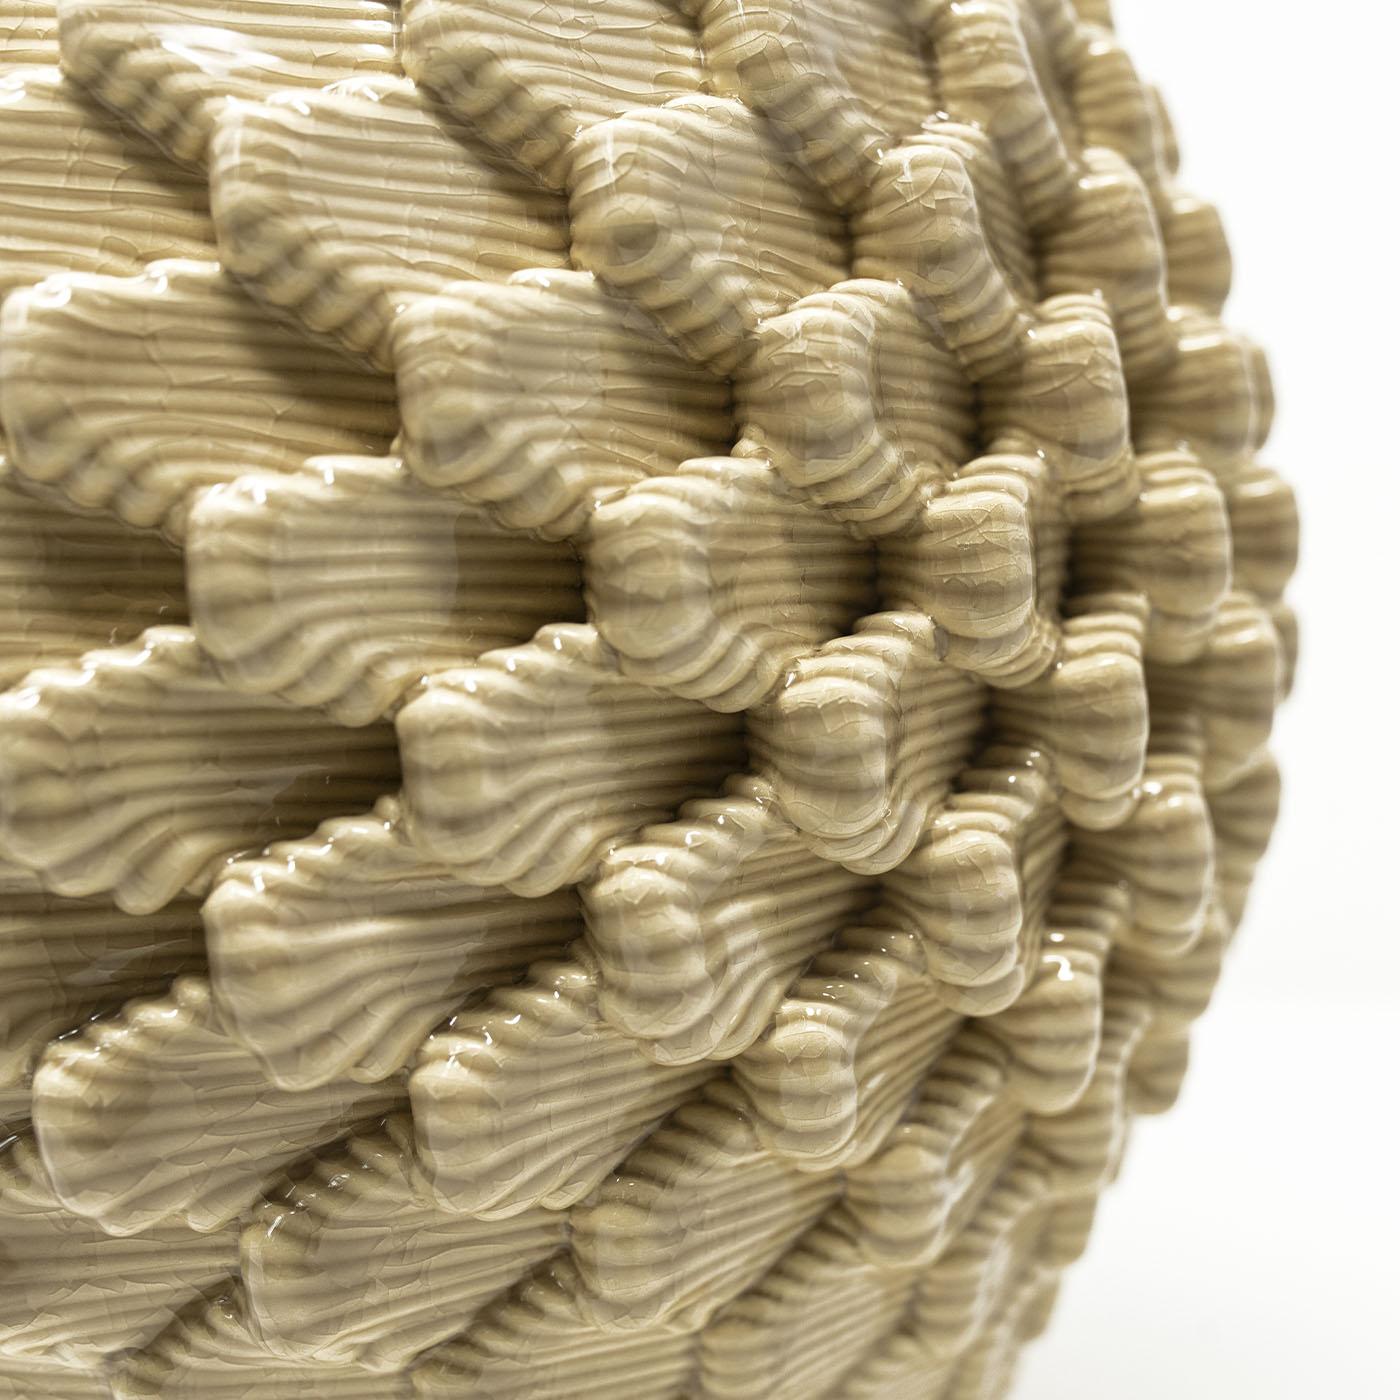 Alma, a 3D-printed vase, draws from the Caltagirone pine cone's shape, symbolizing vitality and eternity. Combining digital artistry, craftsmanship, and nature, it embodies Sicilian allure. Reflecting the fertility of the mind and novel ideas, Alma